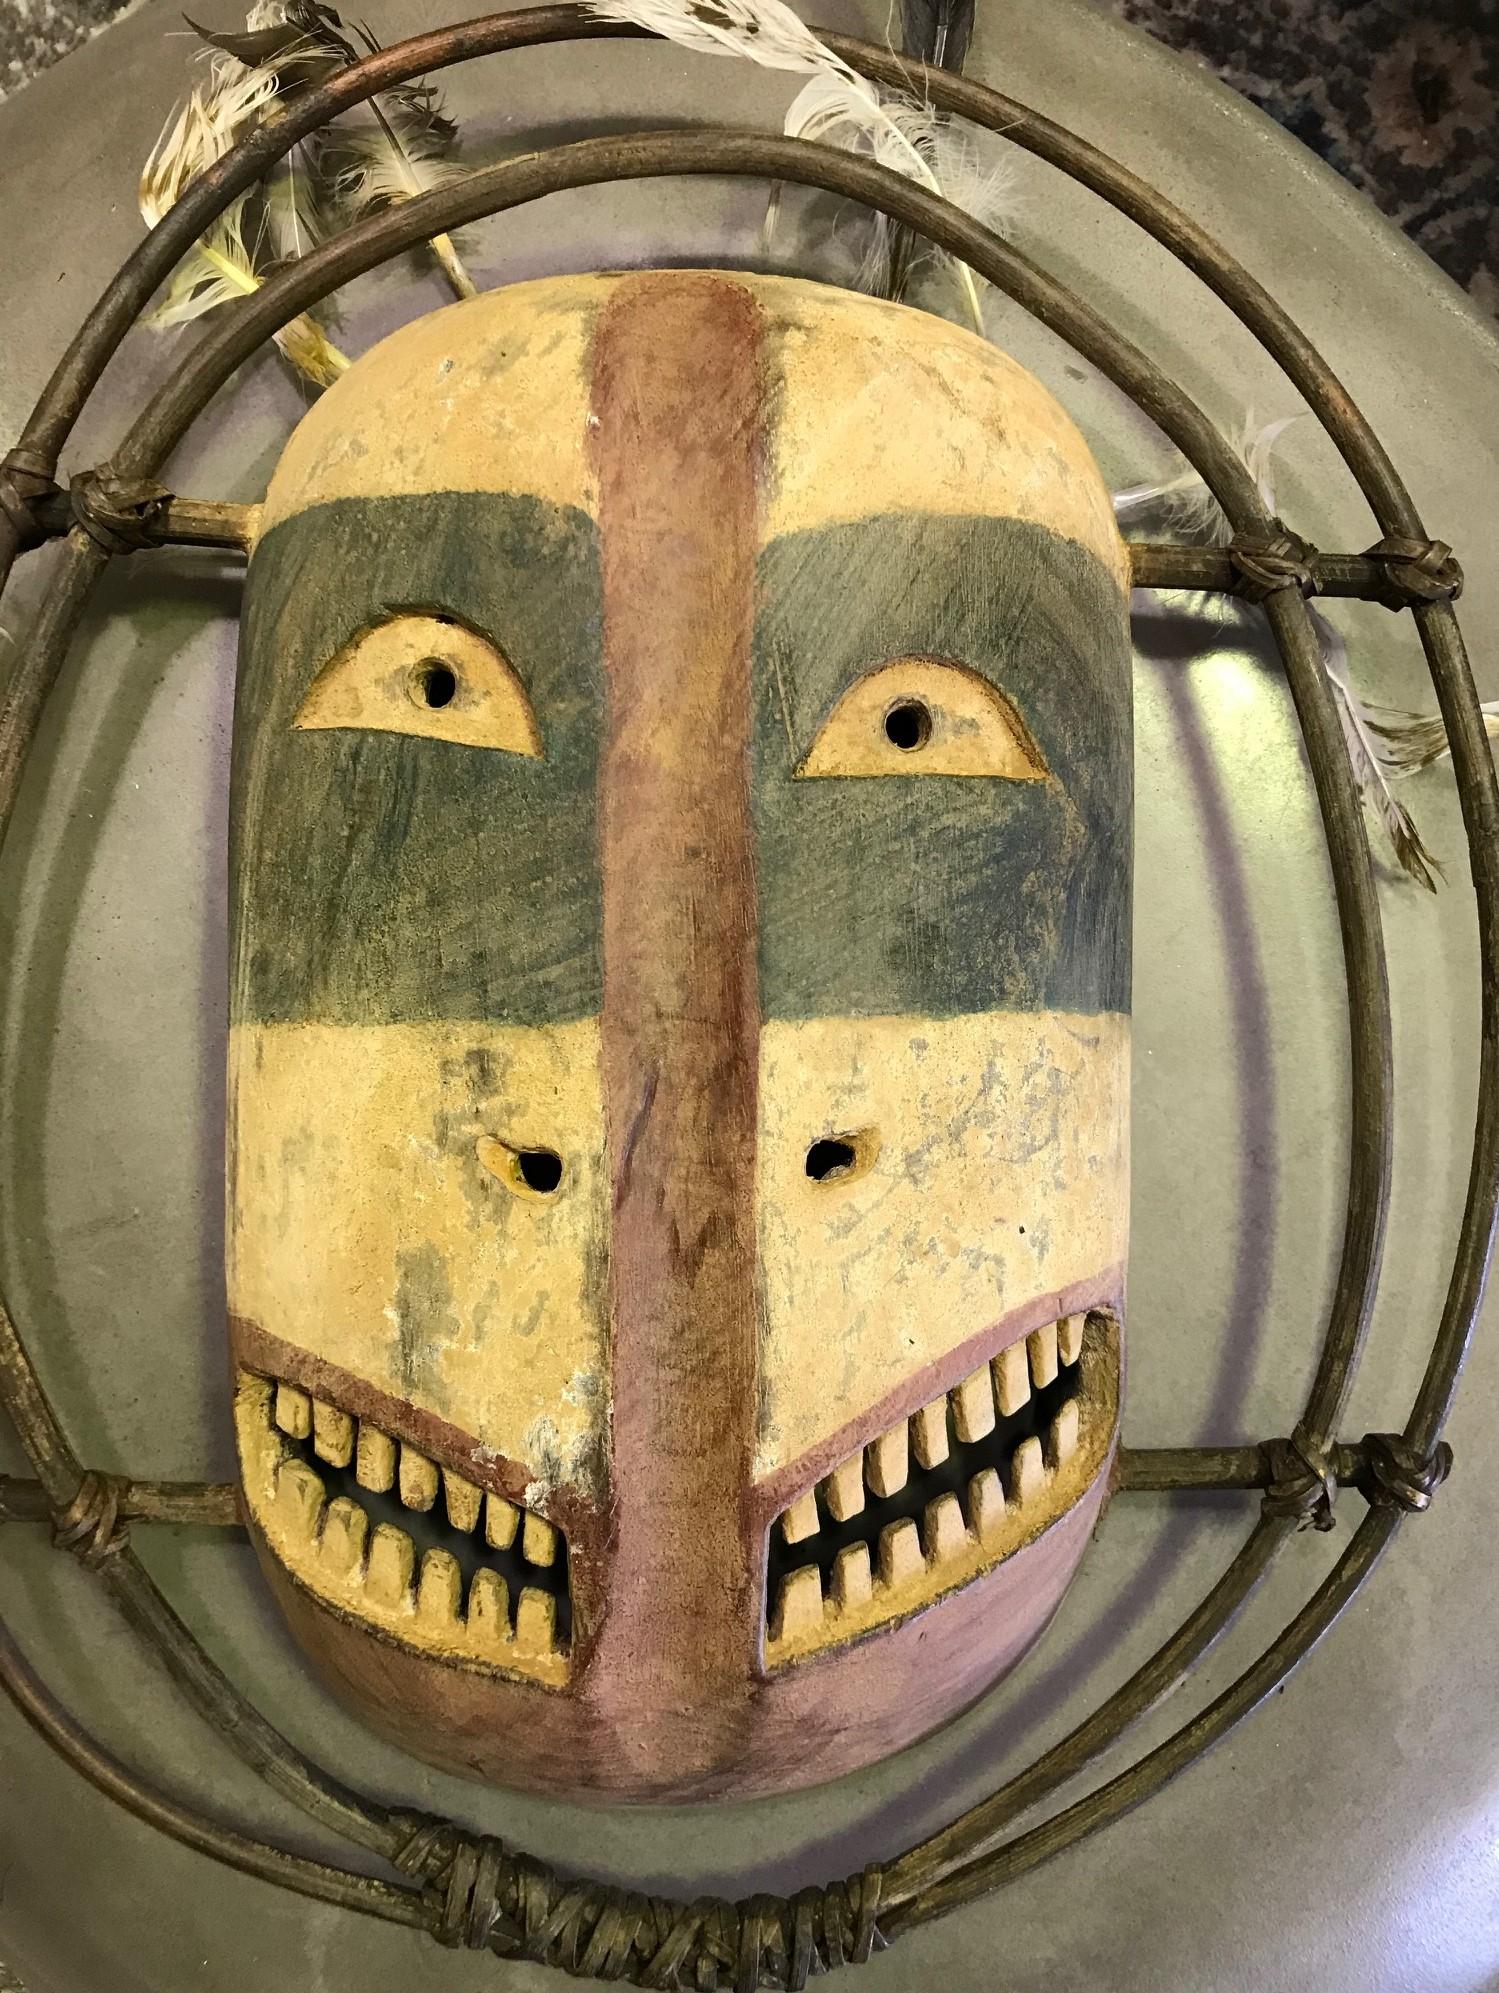 A fantastic and somewhat grotesquely strange mask by the Yup'ik (Yupik) aboriginal, indigenous people of South-Western & South Central Alaska. The Yup'ik people, who are related to the Inuit peoples, have a long history of ceremonial mask making.